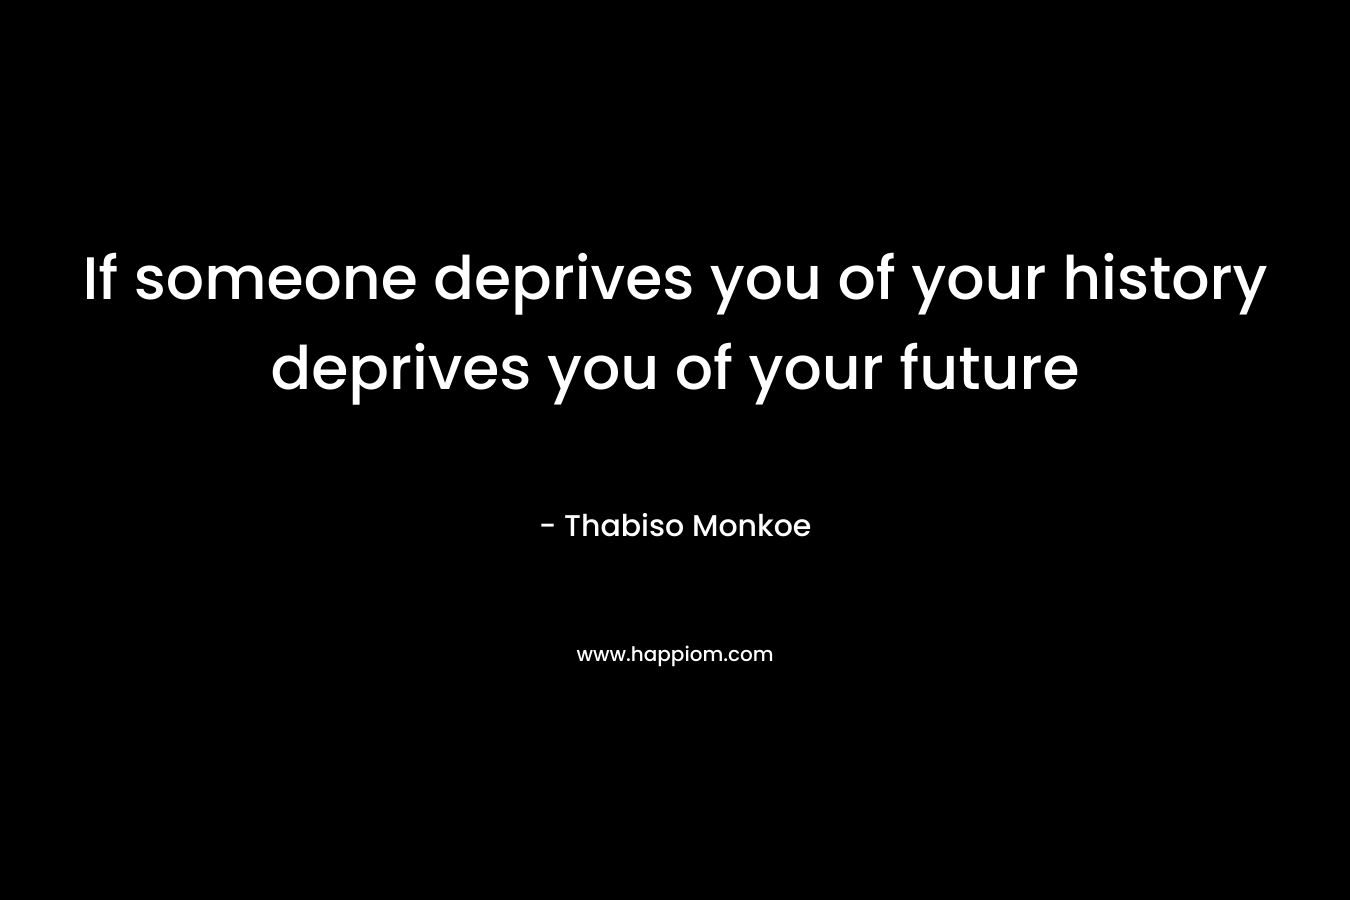 If someone deprives you of your history deprives you of your future